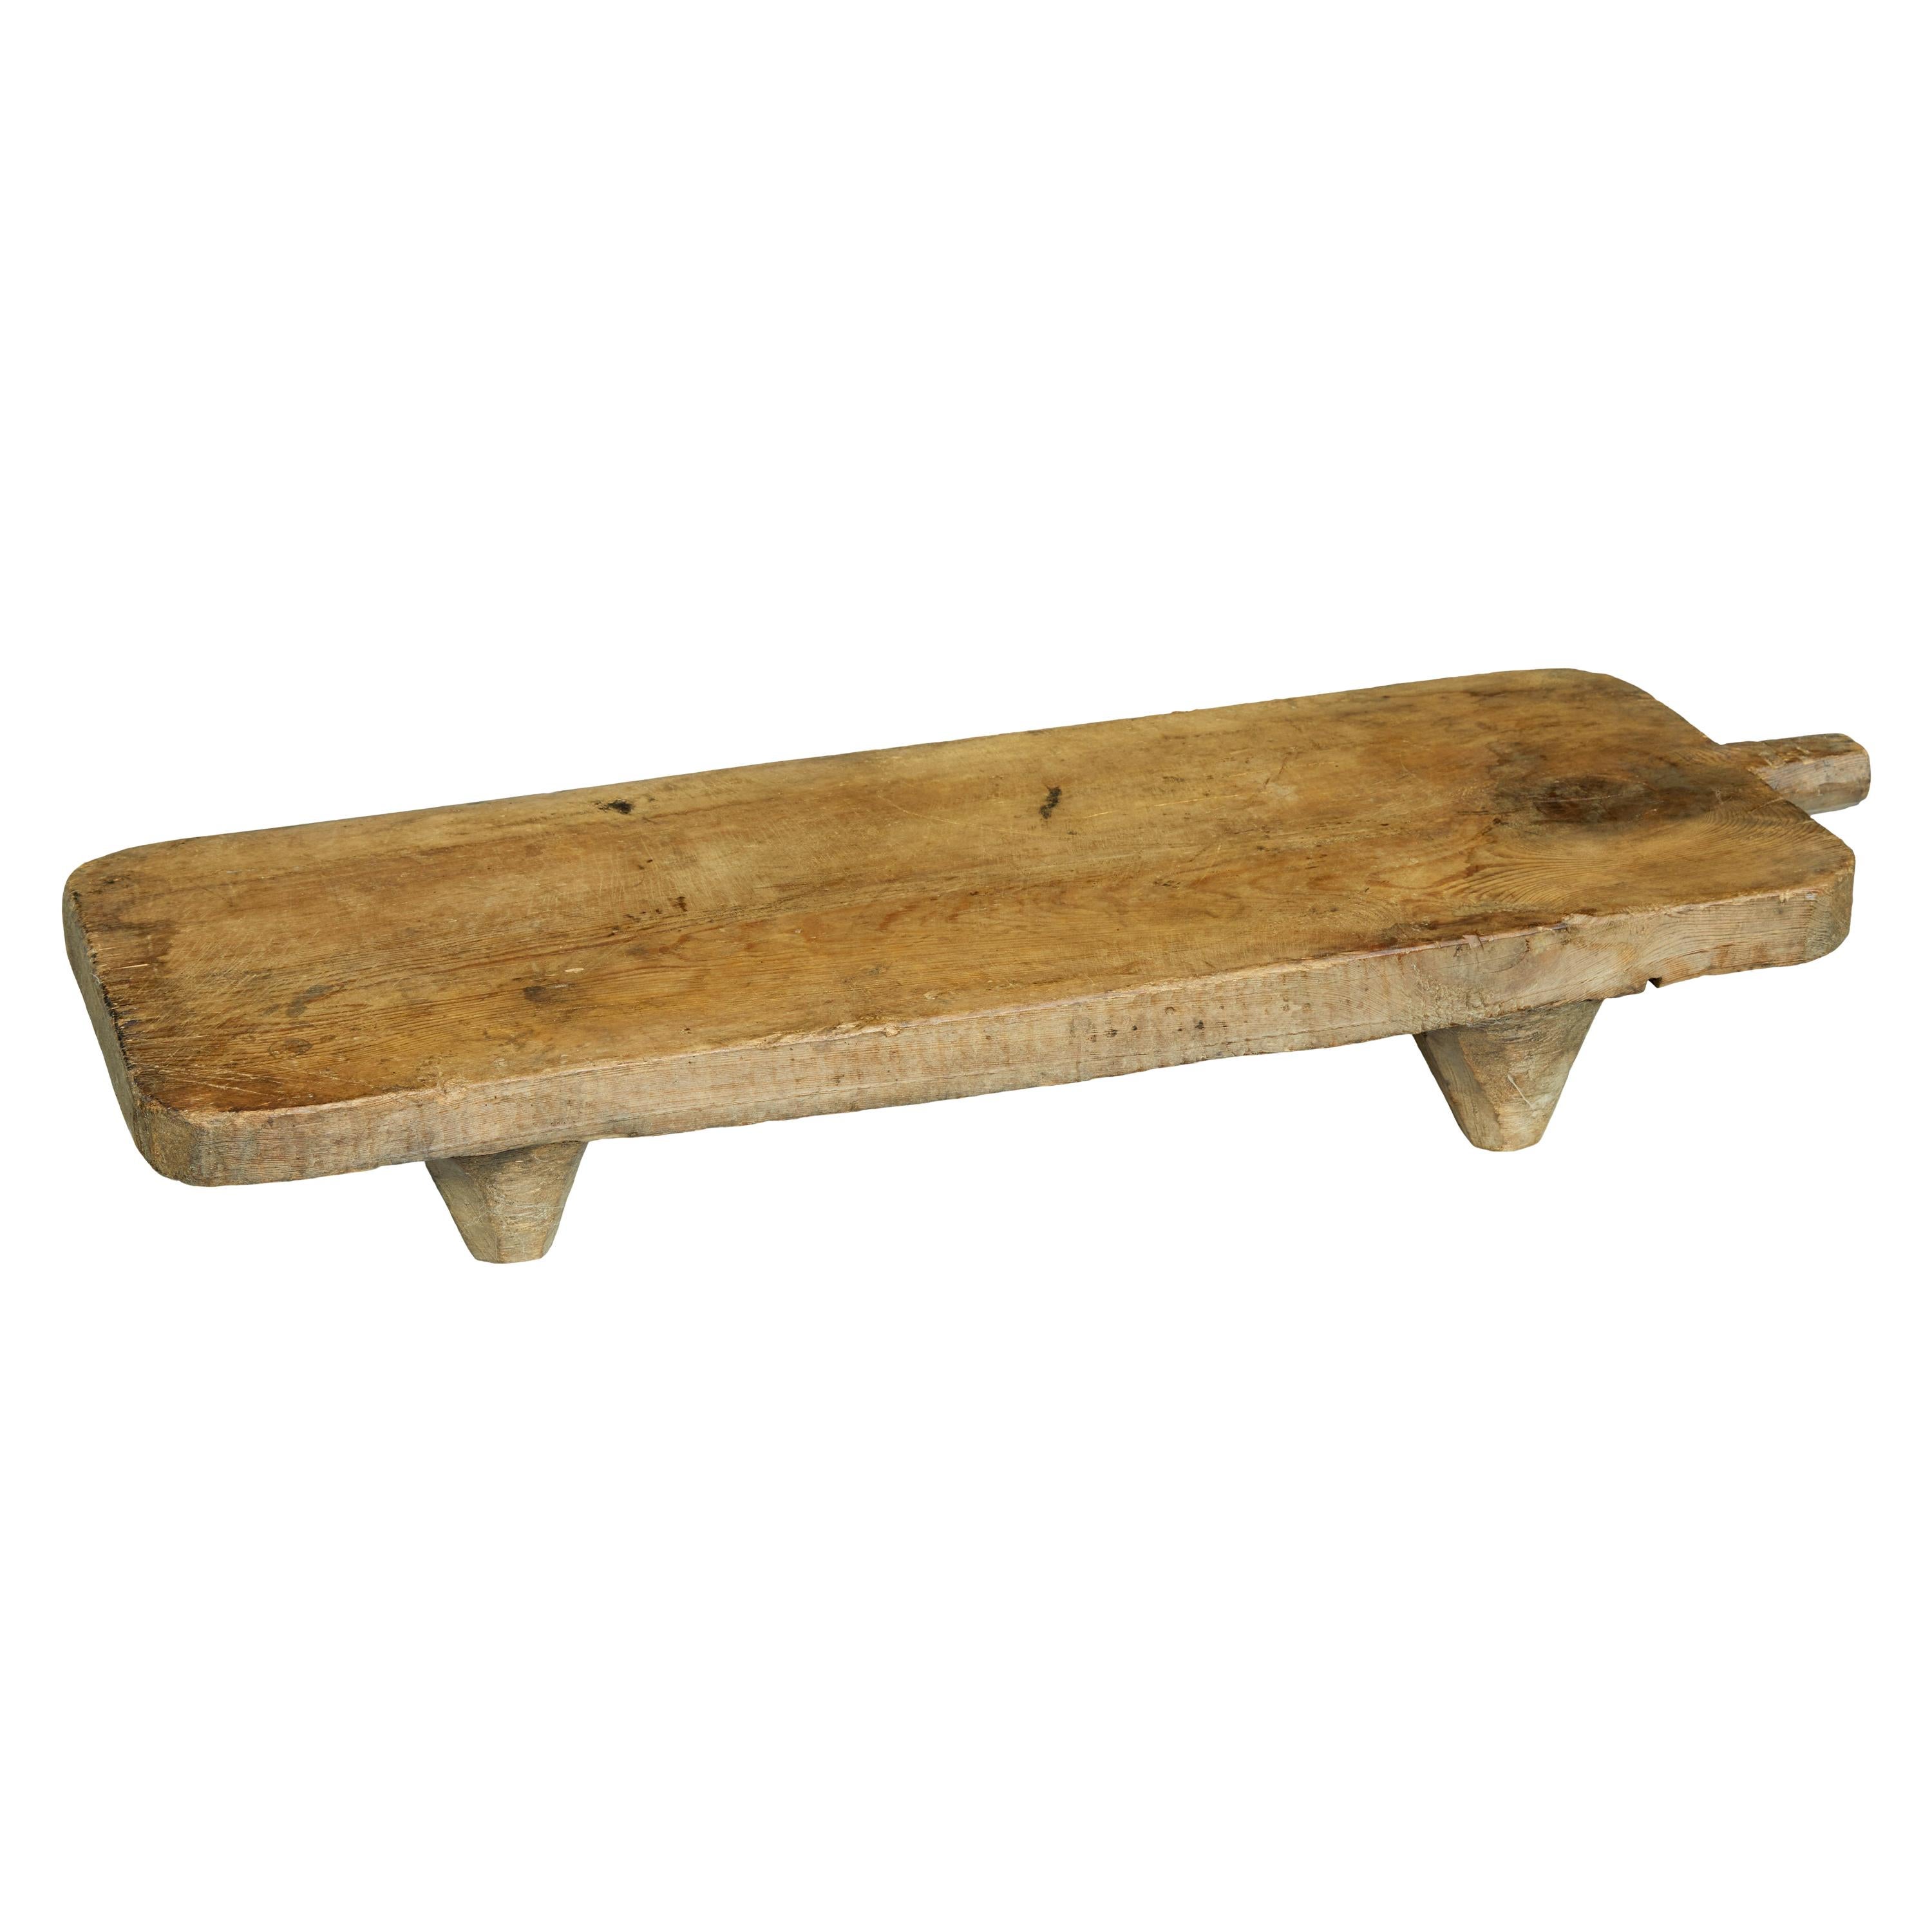 19th Century Solid Pine Chopping Board with Feet